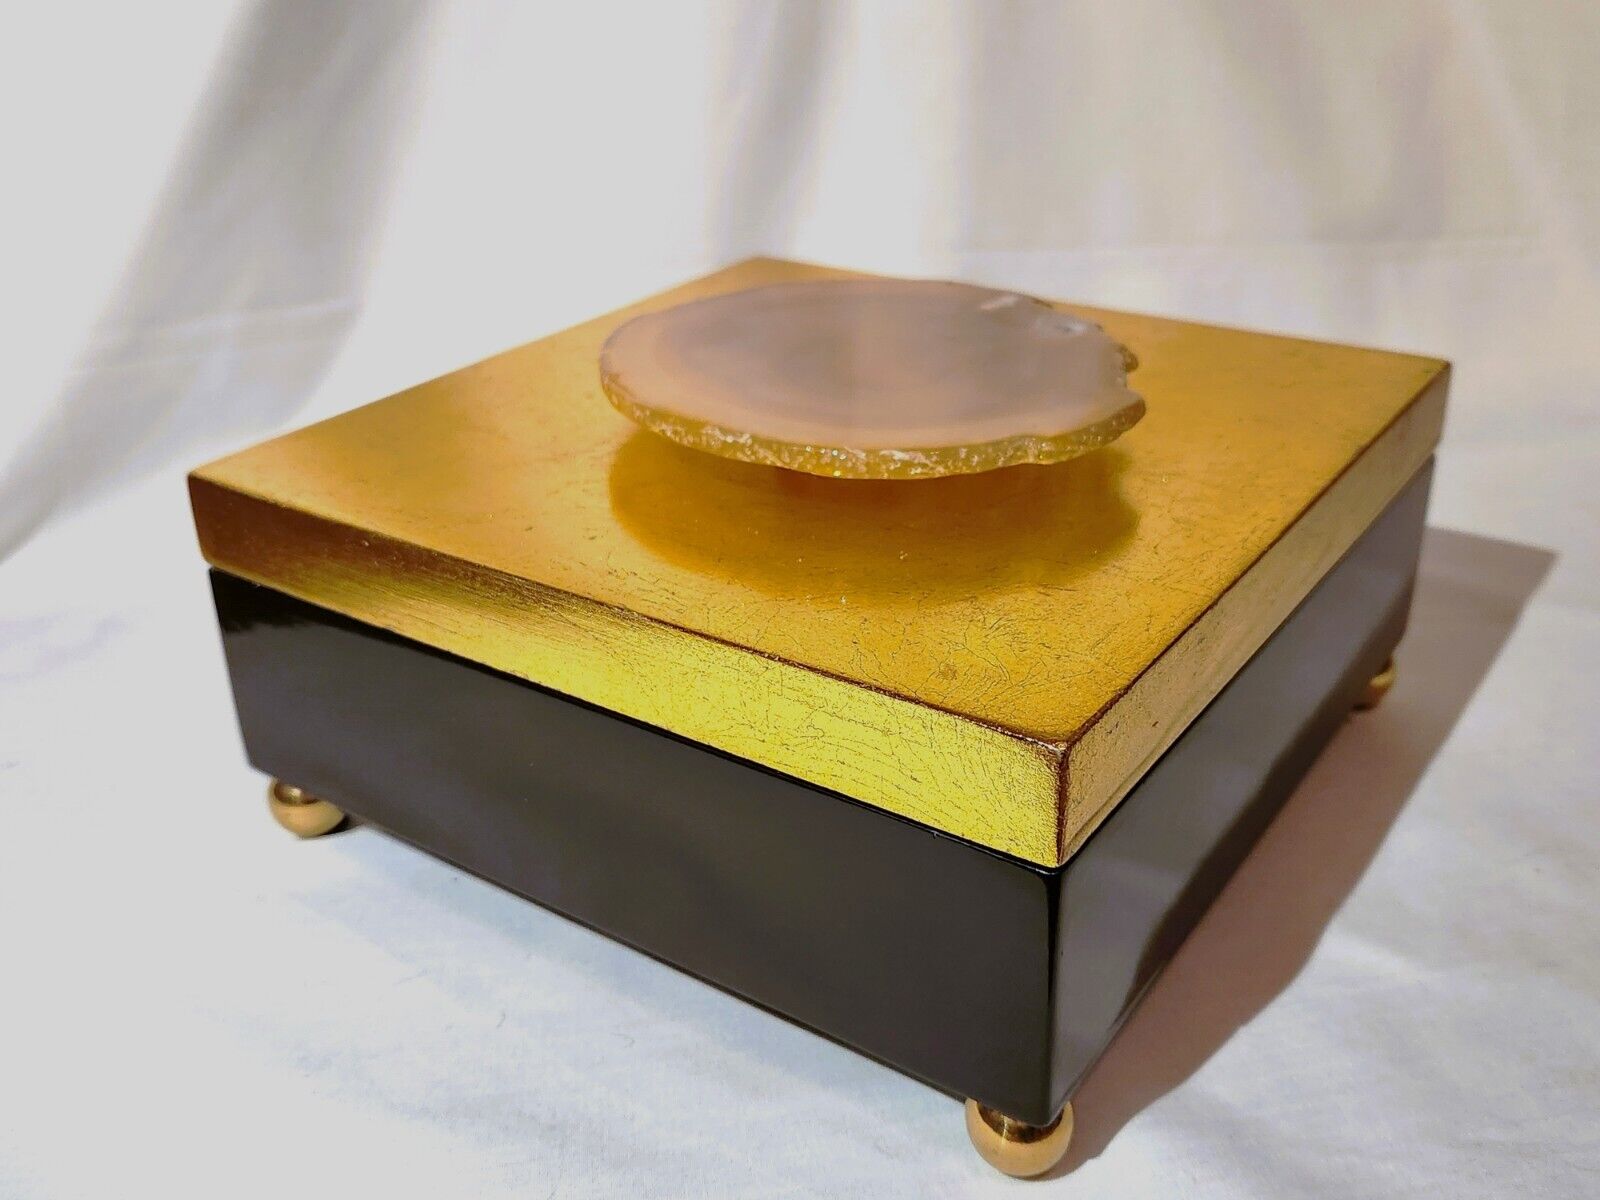 JOHN RICHARD ACCENTS Footed Wood Box–Geode Accent–Gold Leaf/Black Wood-2015